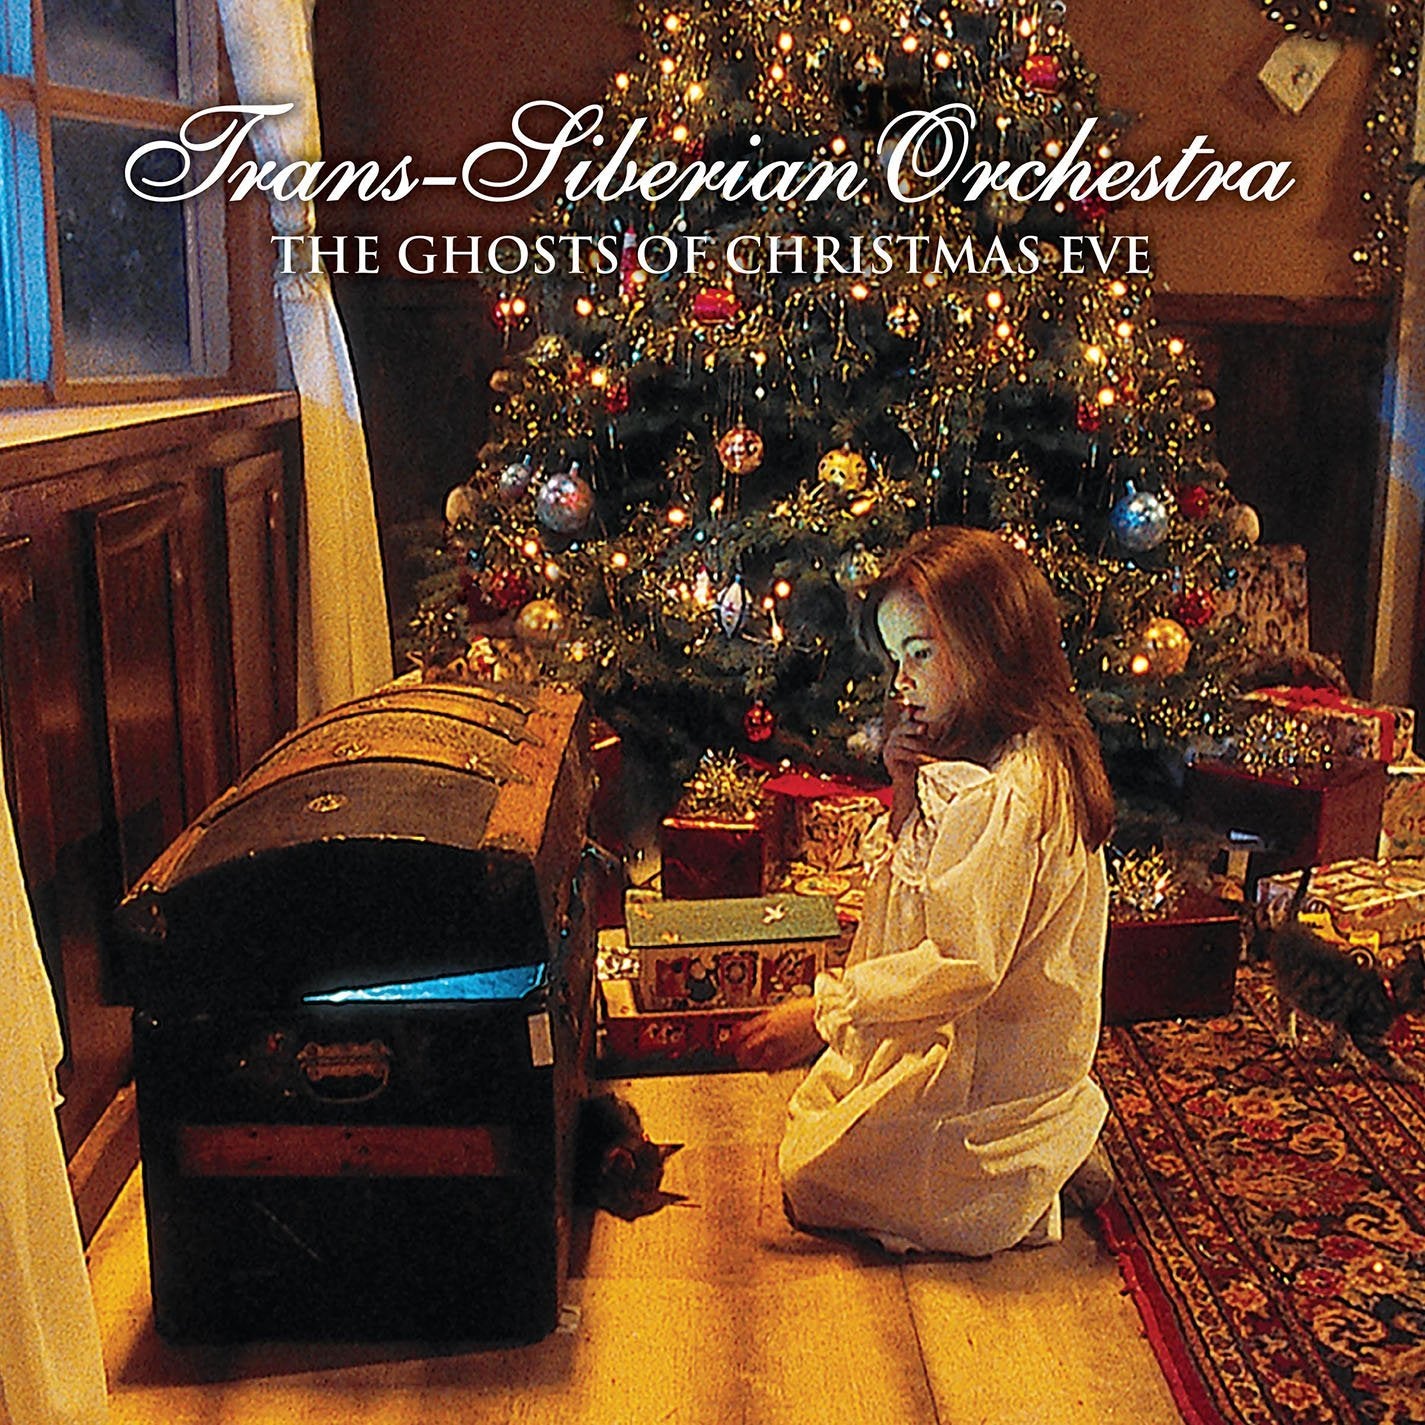 TRANS-SIBERIAN ORCHESTRA - THE GHOSTS OF CHRISTMAS EVE - VINYL LP